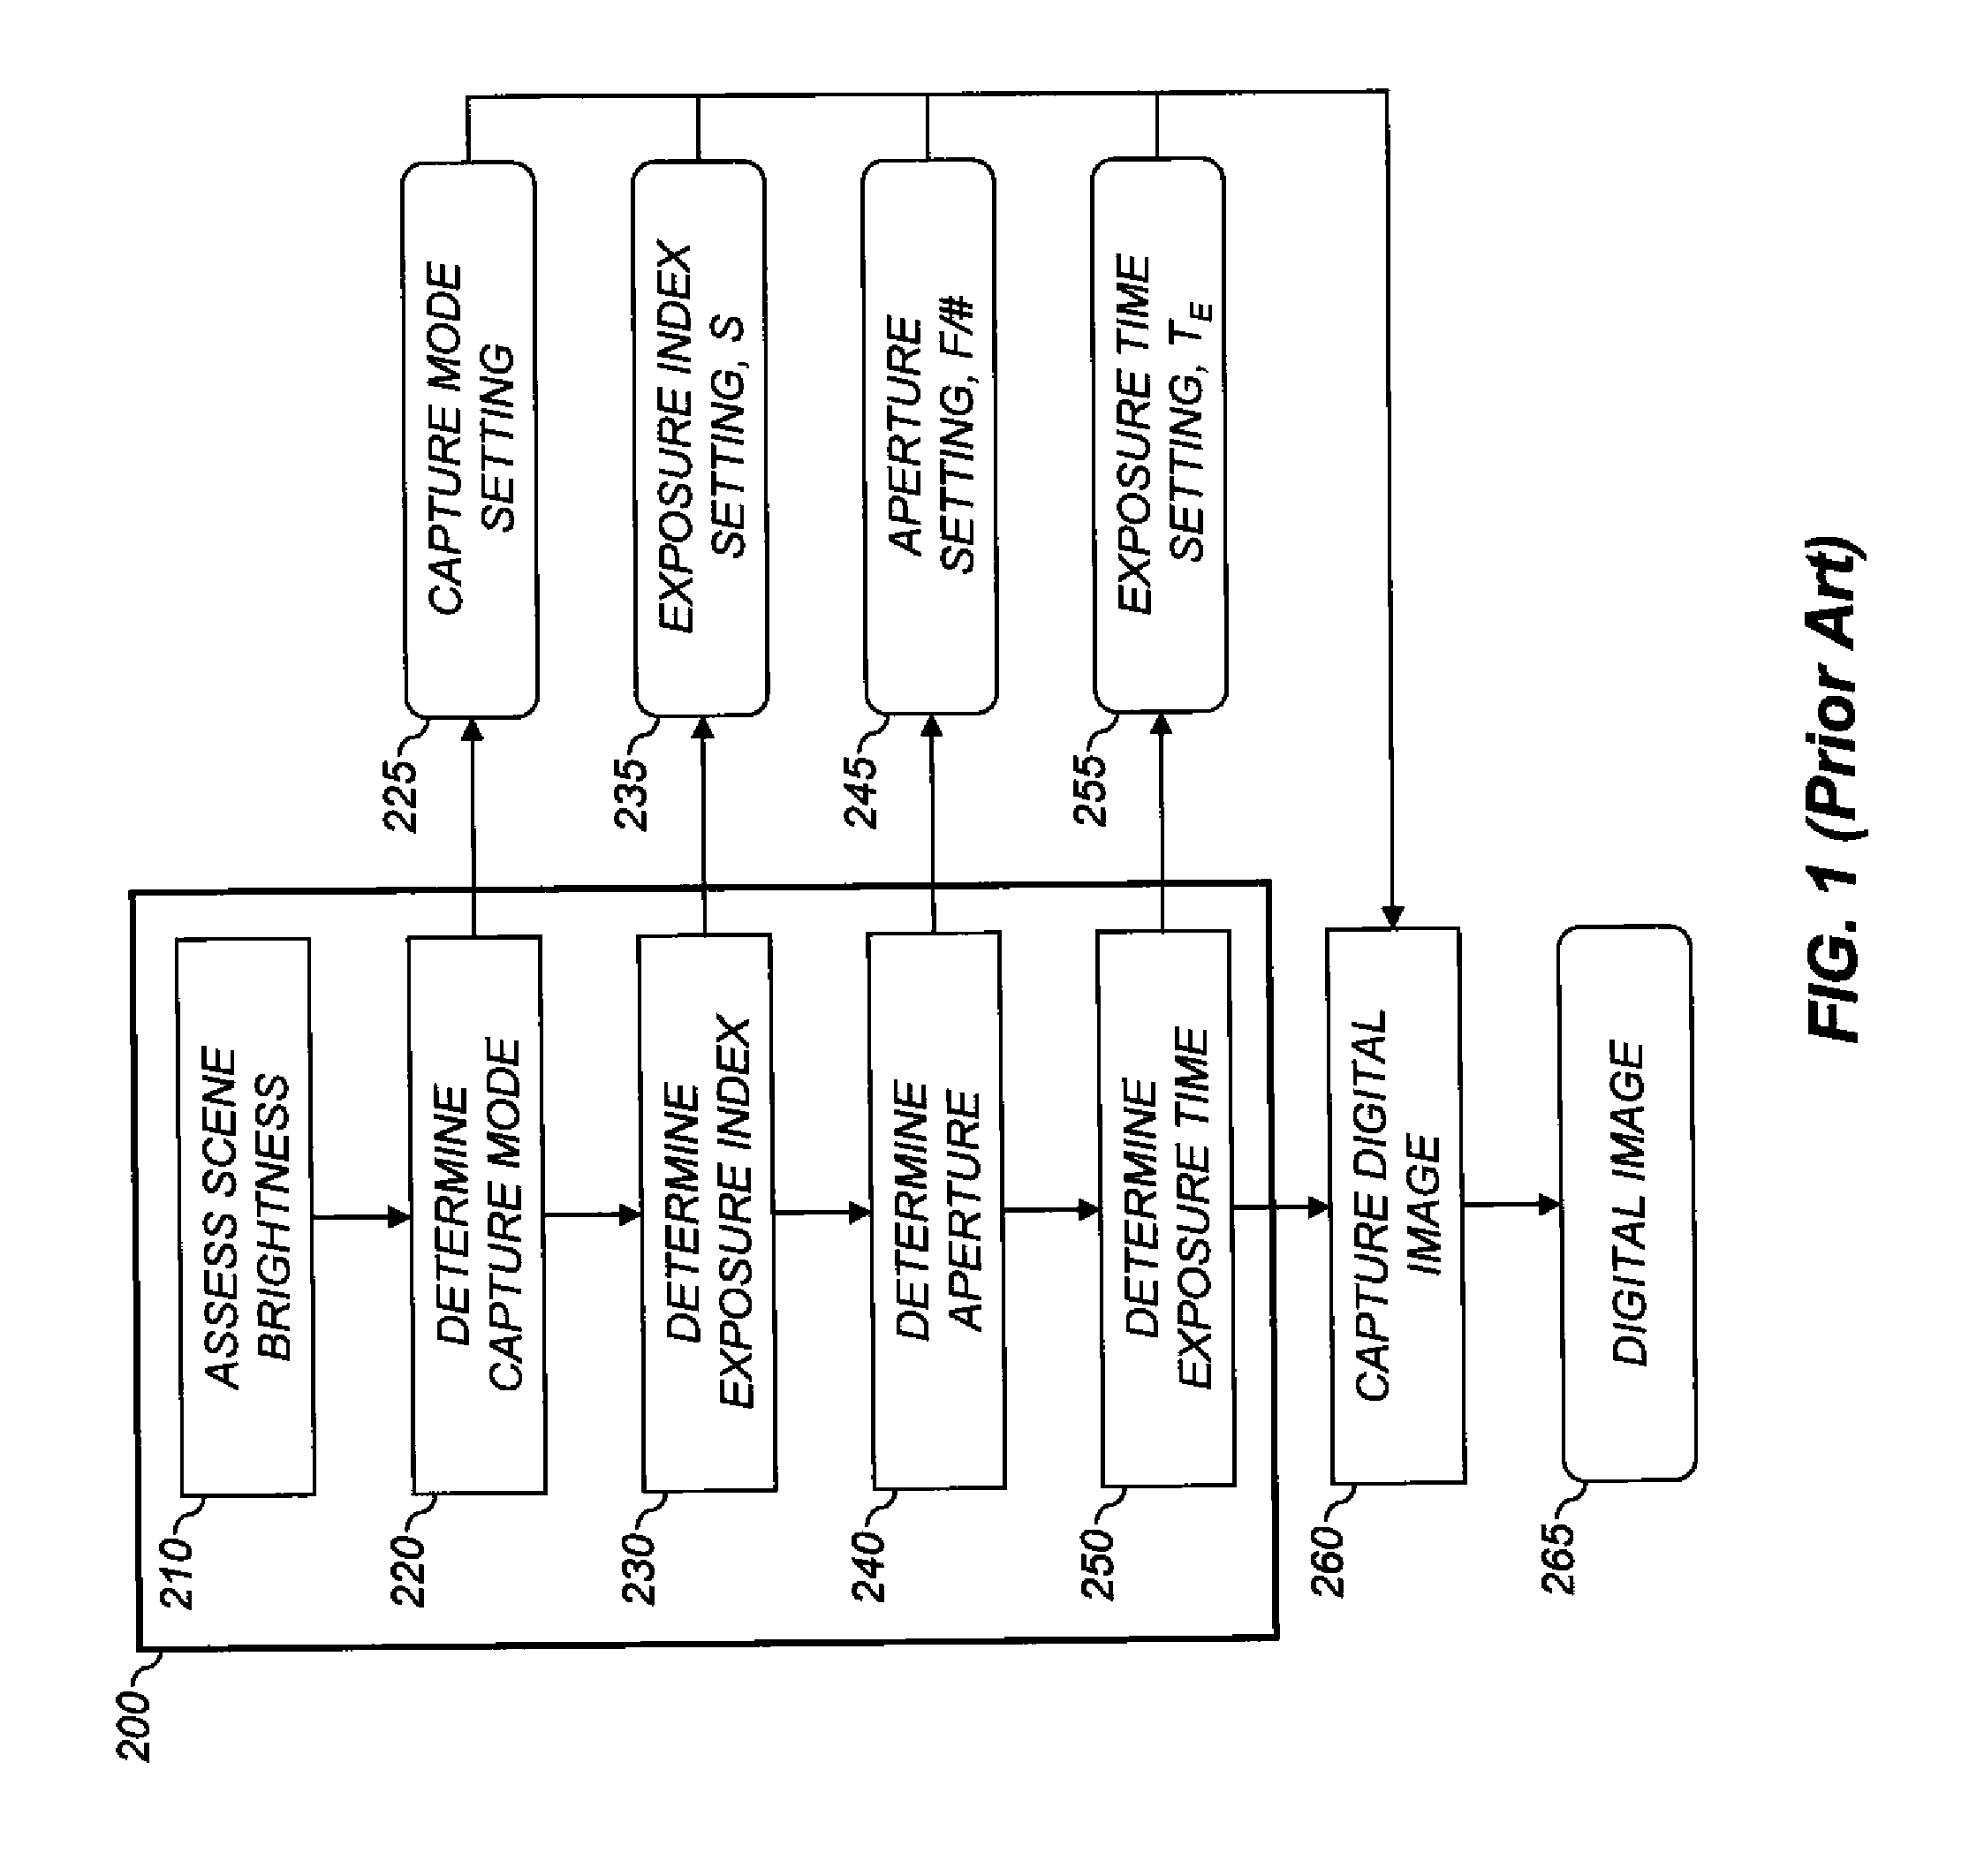 Imaging system with automatically engaging image stabilization